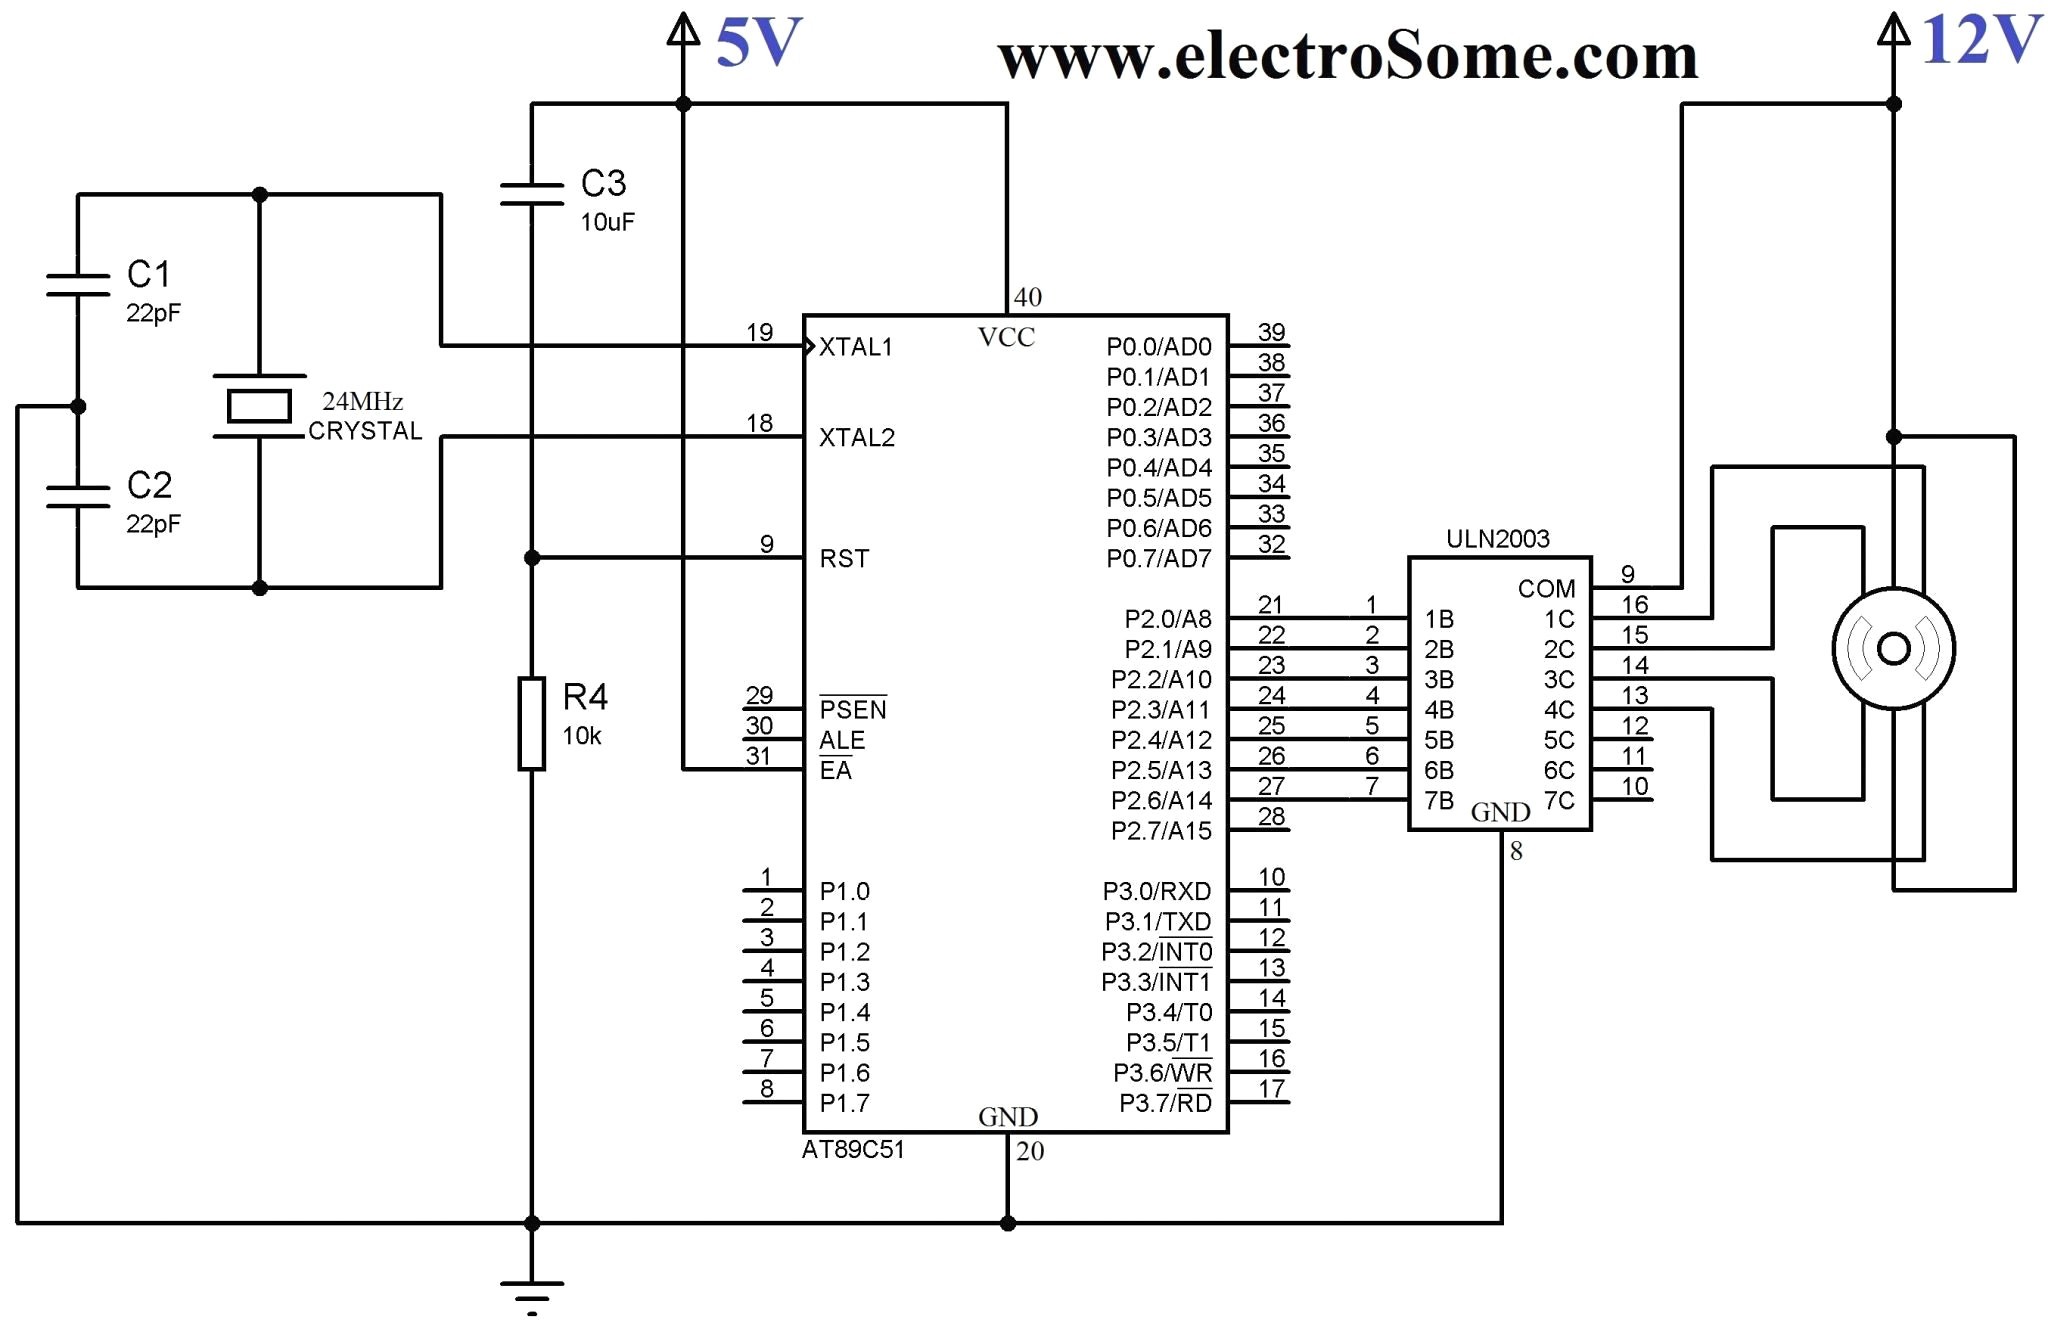 Wiring Diagram Direct line Refrence Lighting Contactor Wiring Diagram With Cell In Ge Industrial